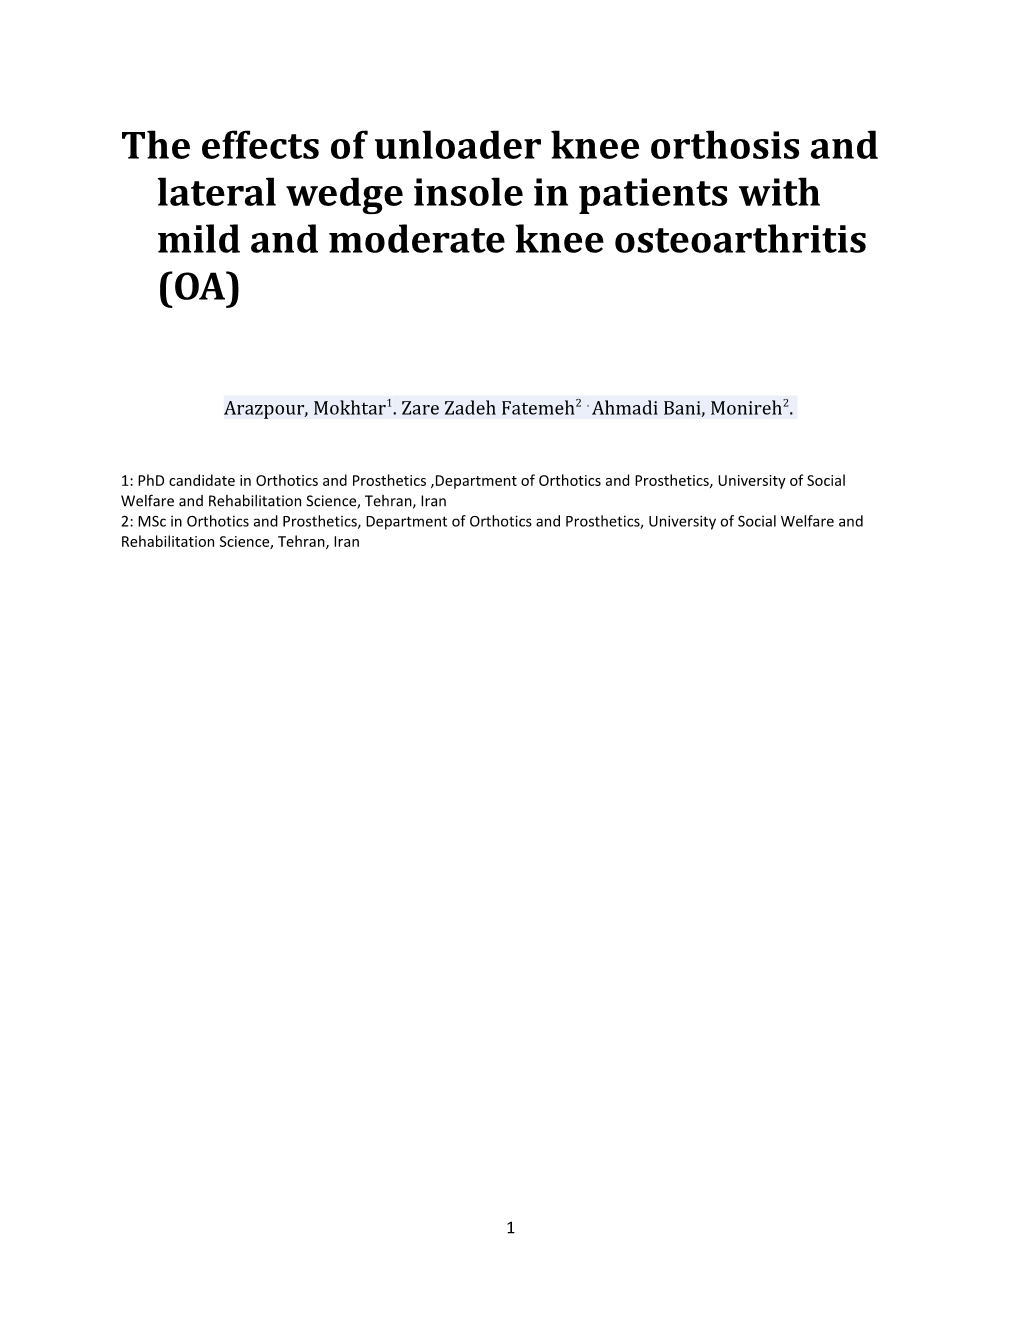 The Effects of Unloader Knee Orthosis and Lateral Wedge Insole in Patients with Mild And